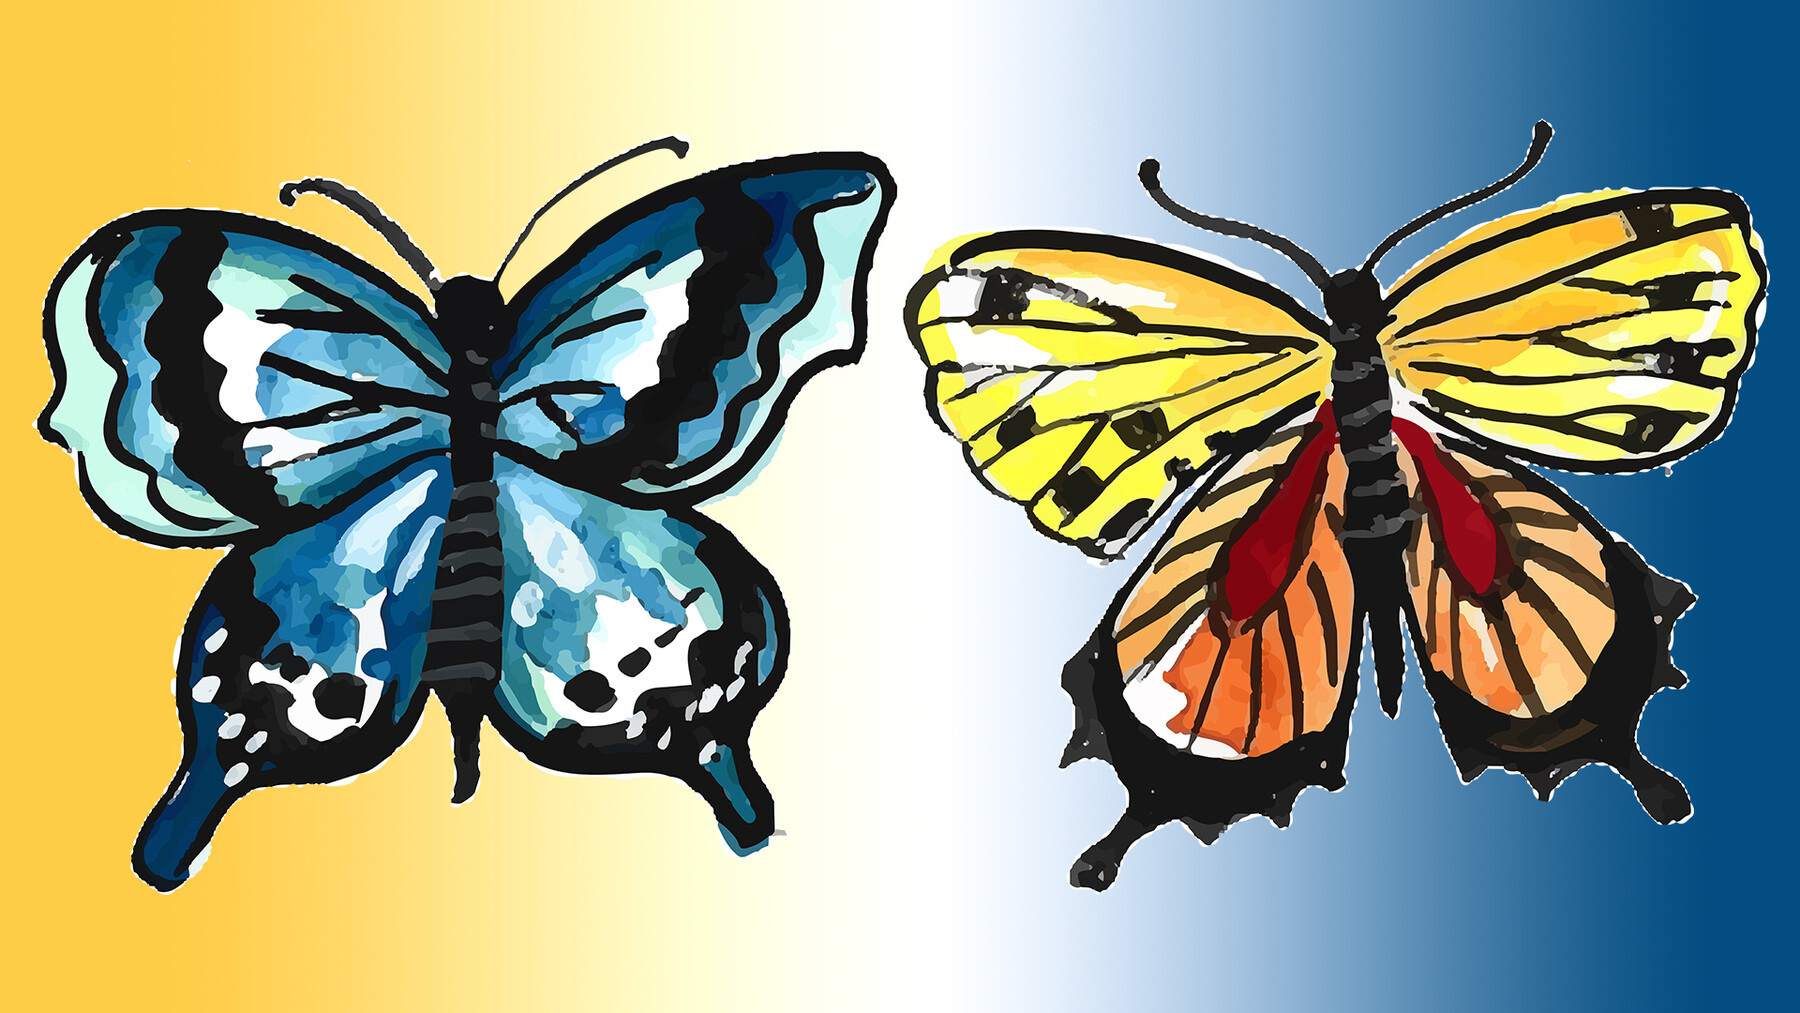 Monarch, Swallowtail and Birdwing Butterfly Set